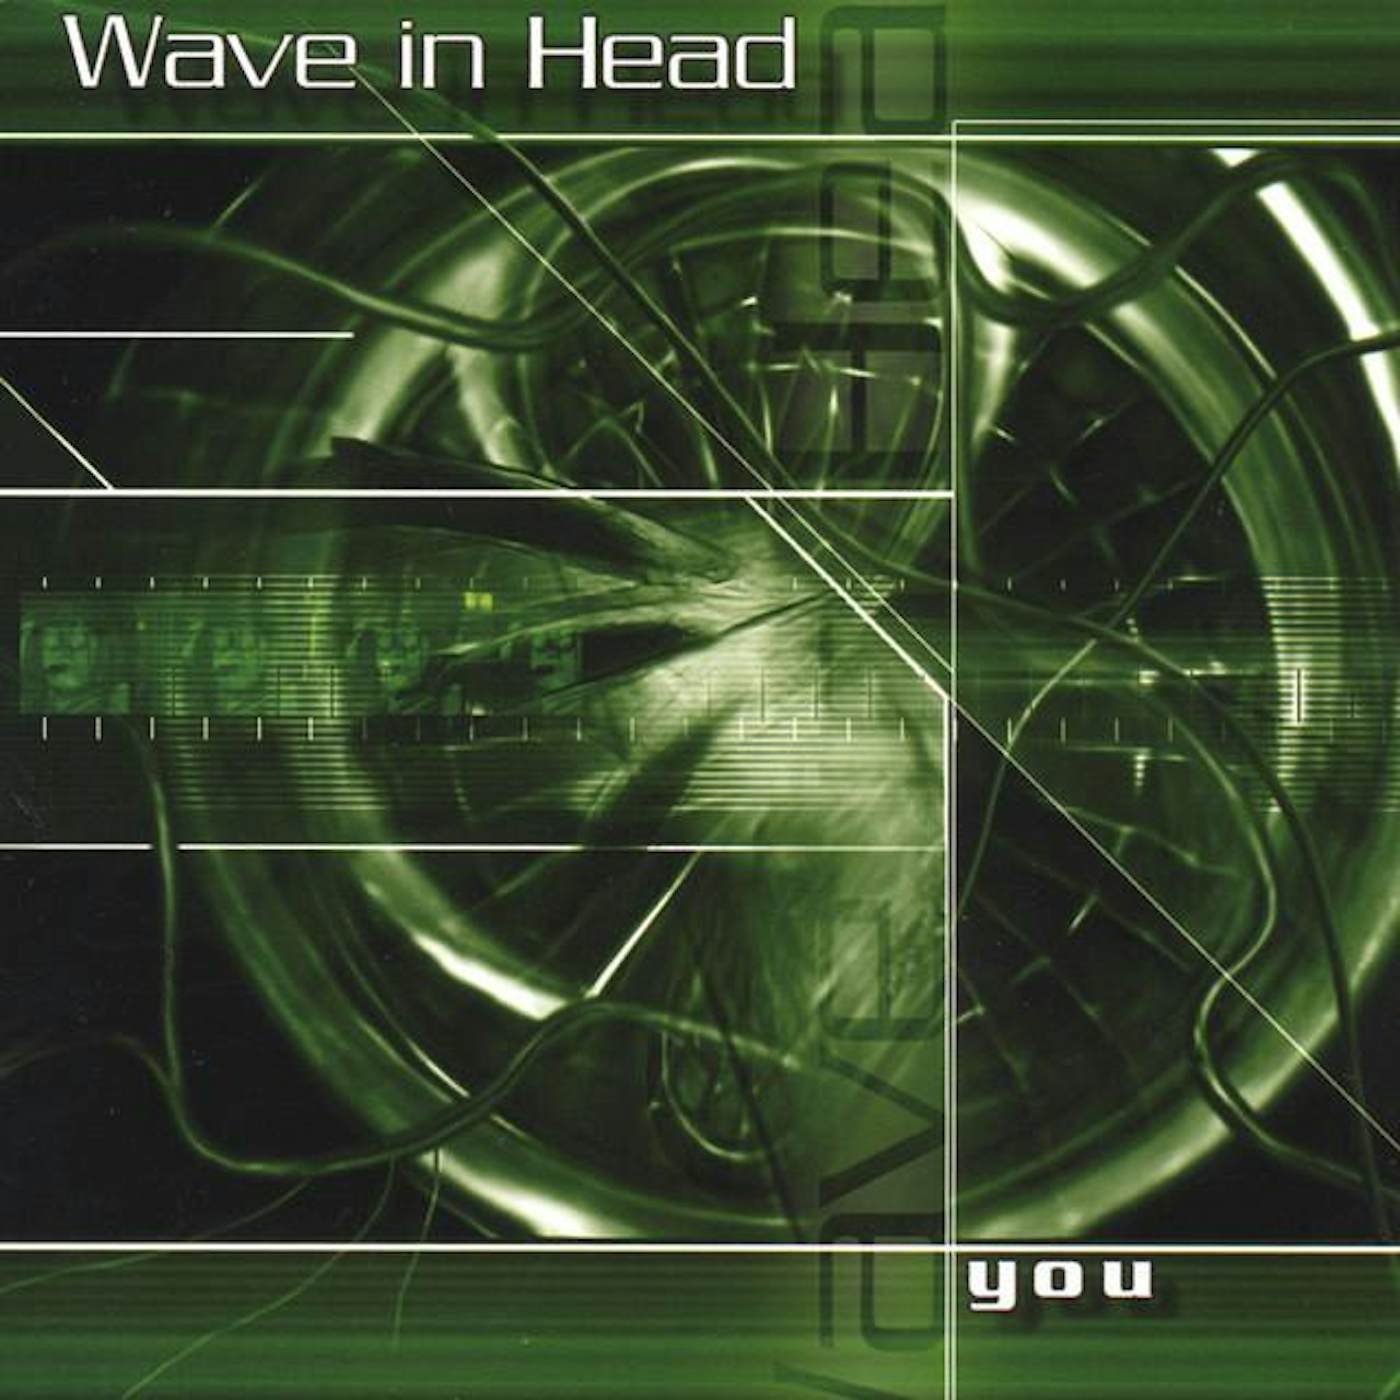 Wave in head